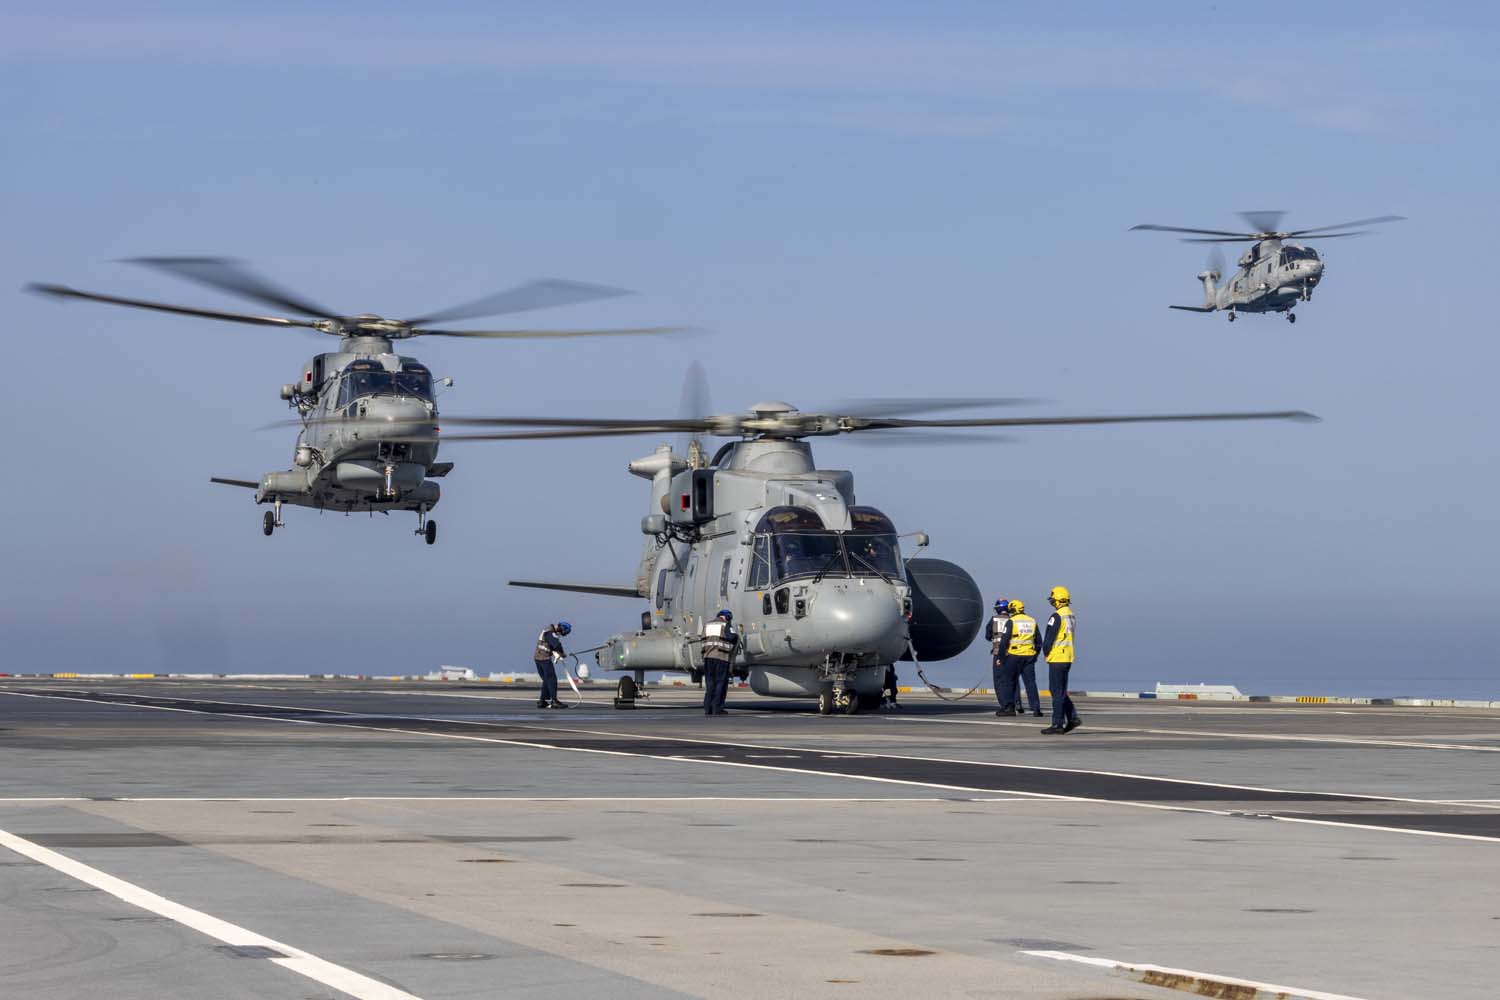 Royal Navy Deploys Upgraded Merlin AEW Helicopter on Aircraft Carrier